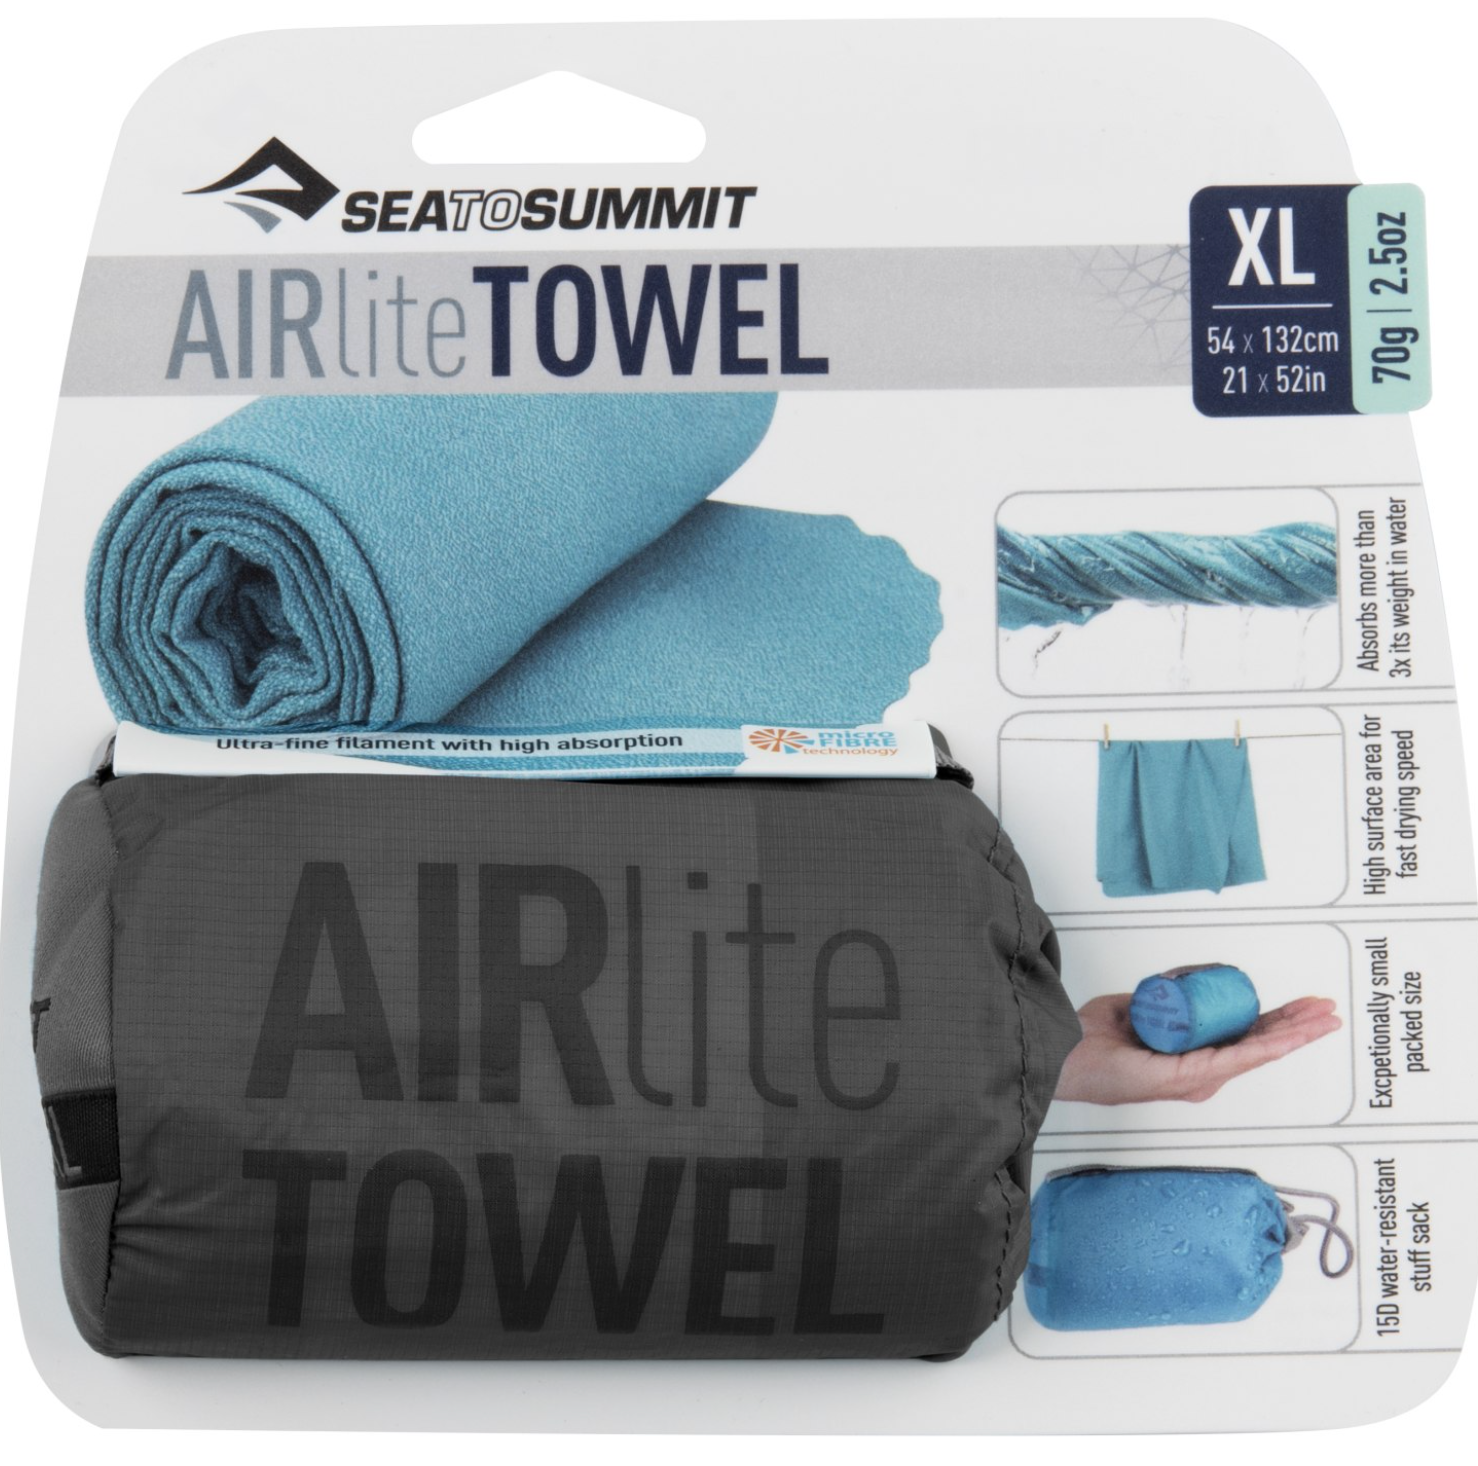 Sea to Summit Airlite Towel - Extra Large